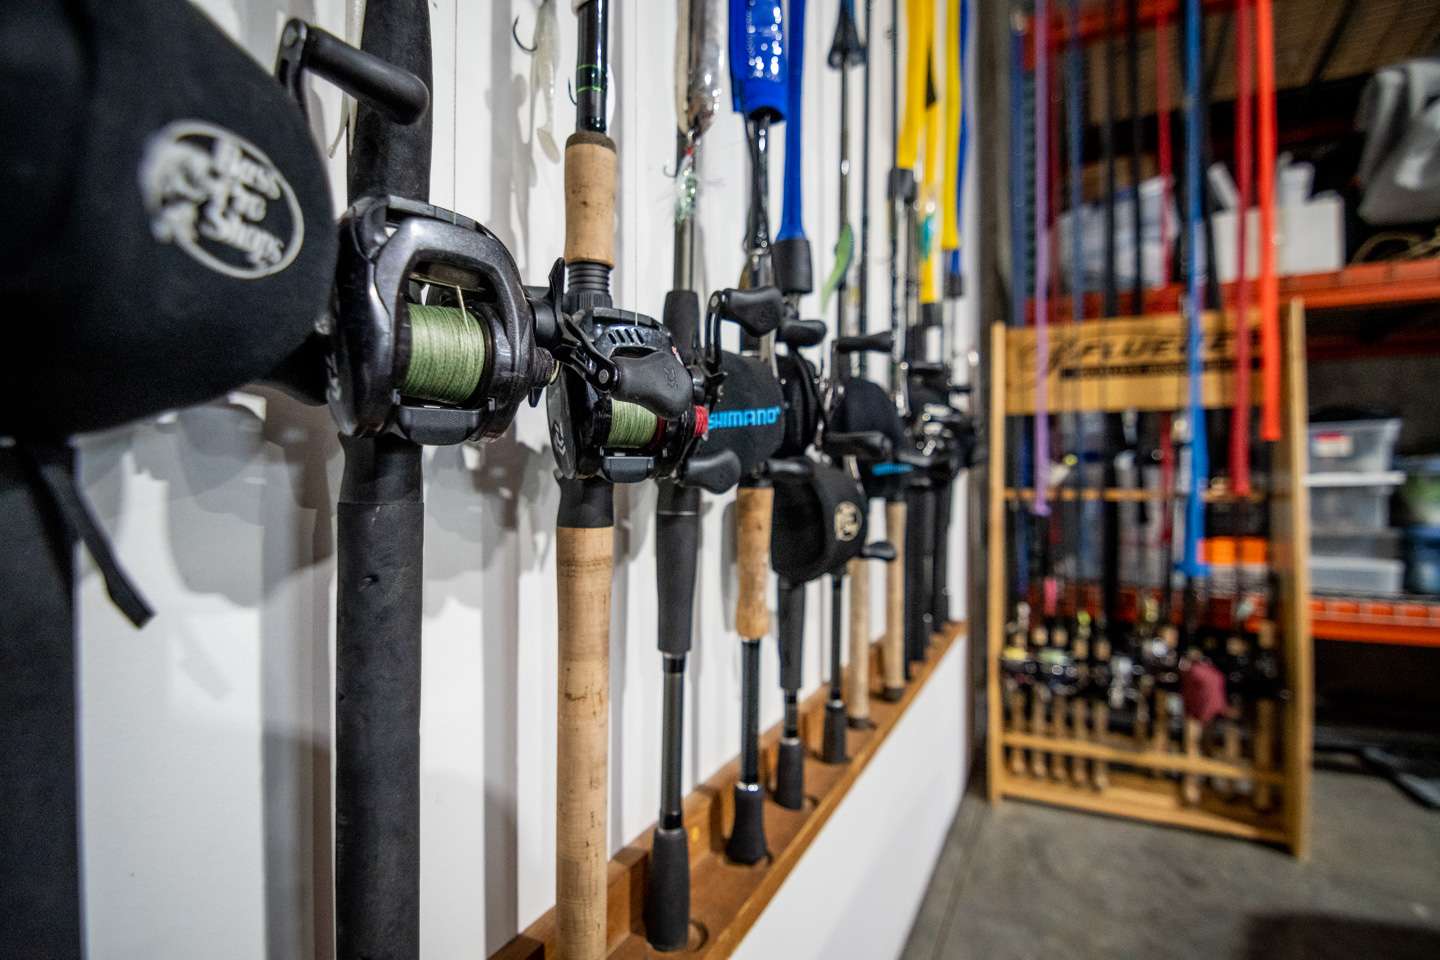 He has everything from tournament rods to surf rods.